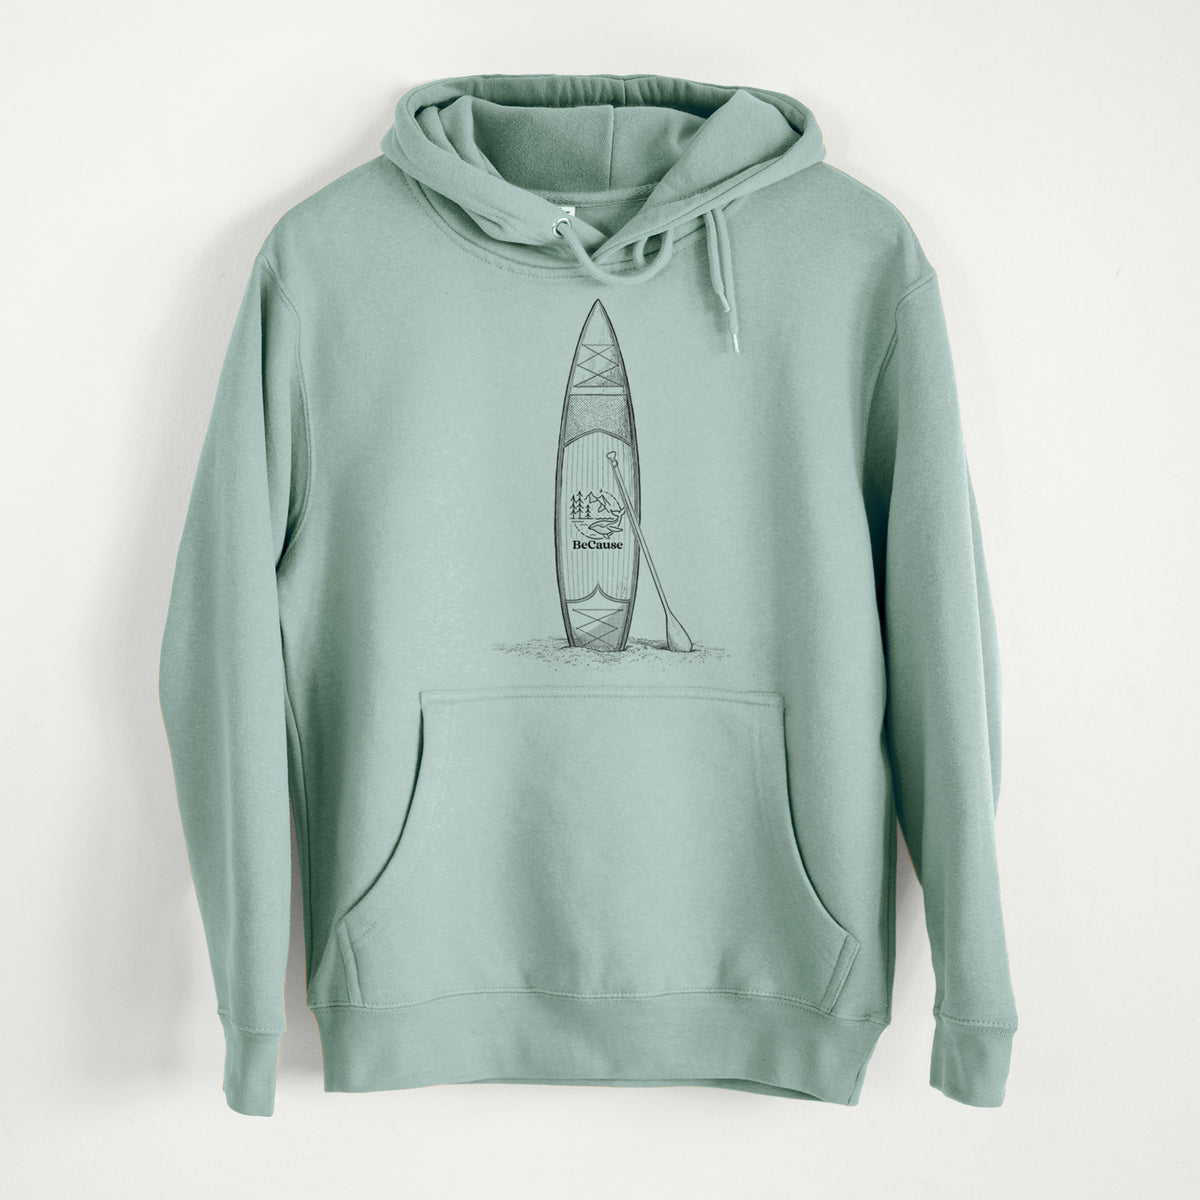 Stand-up Paddle Board  - Mid-Weight Unisex Premium Blend Hoodie